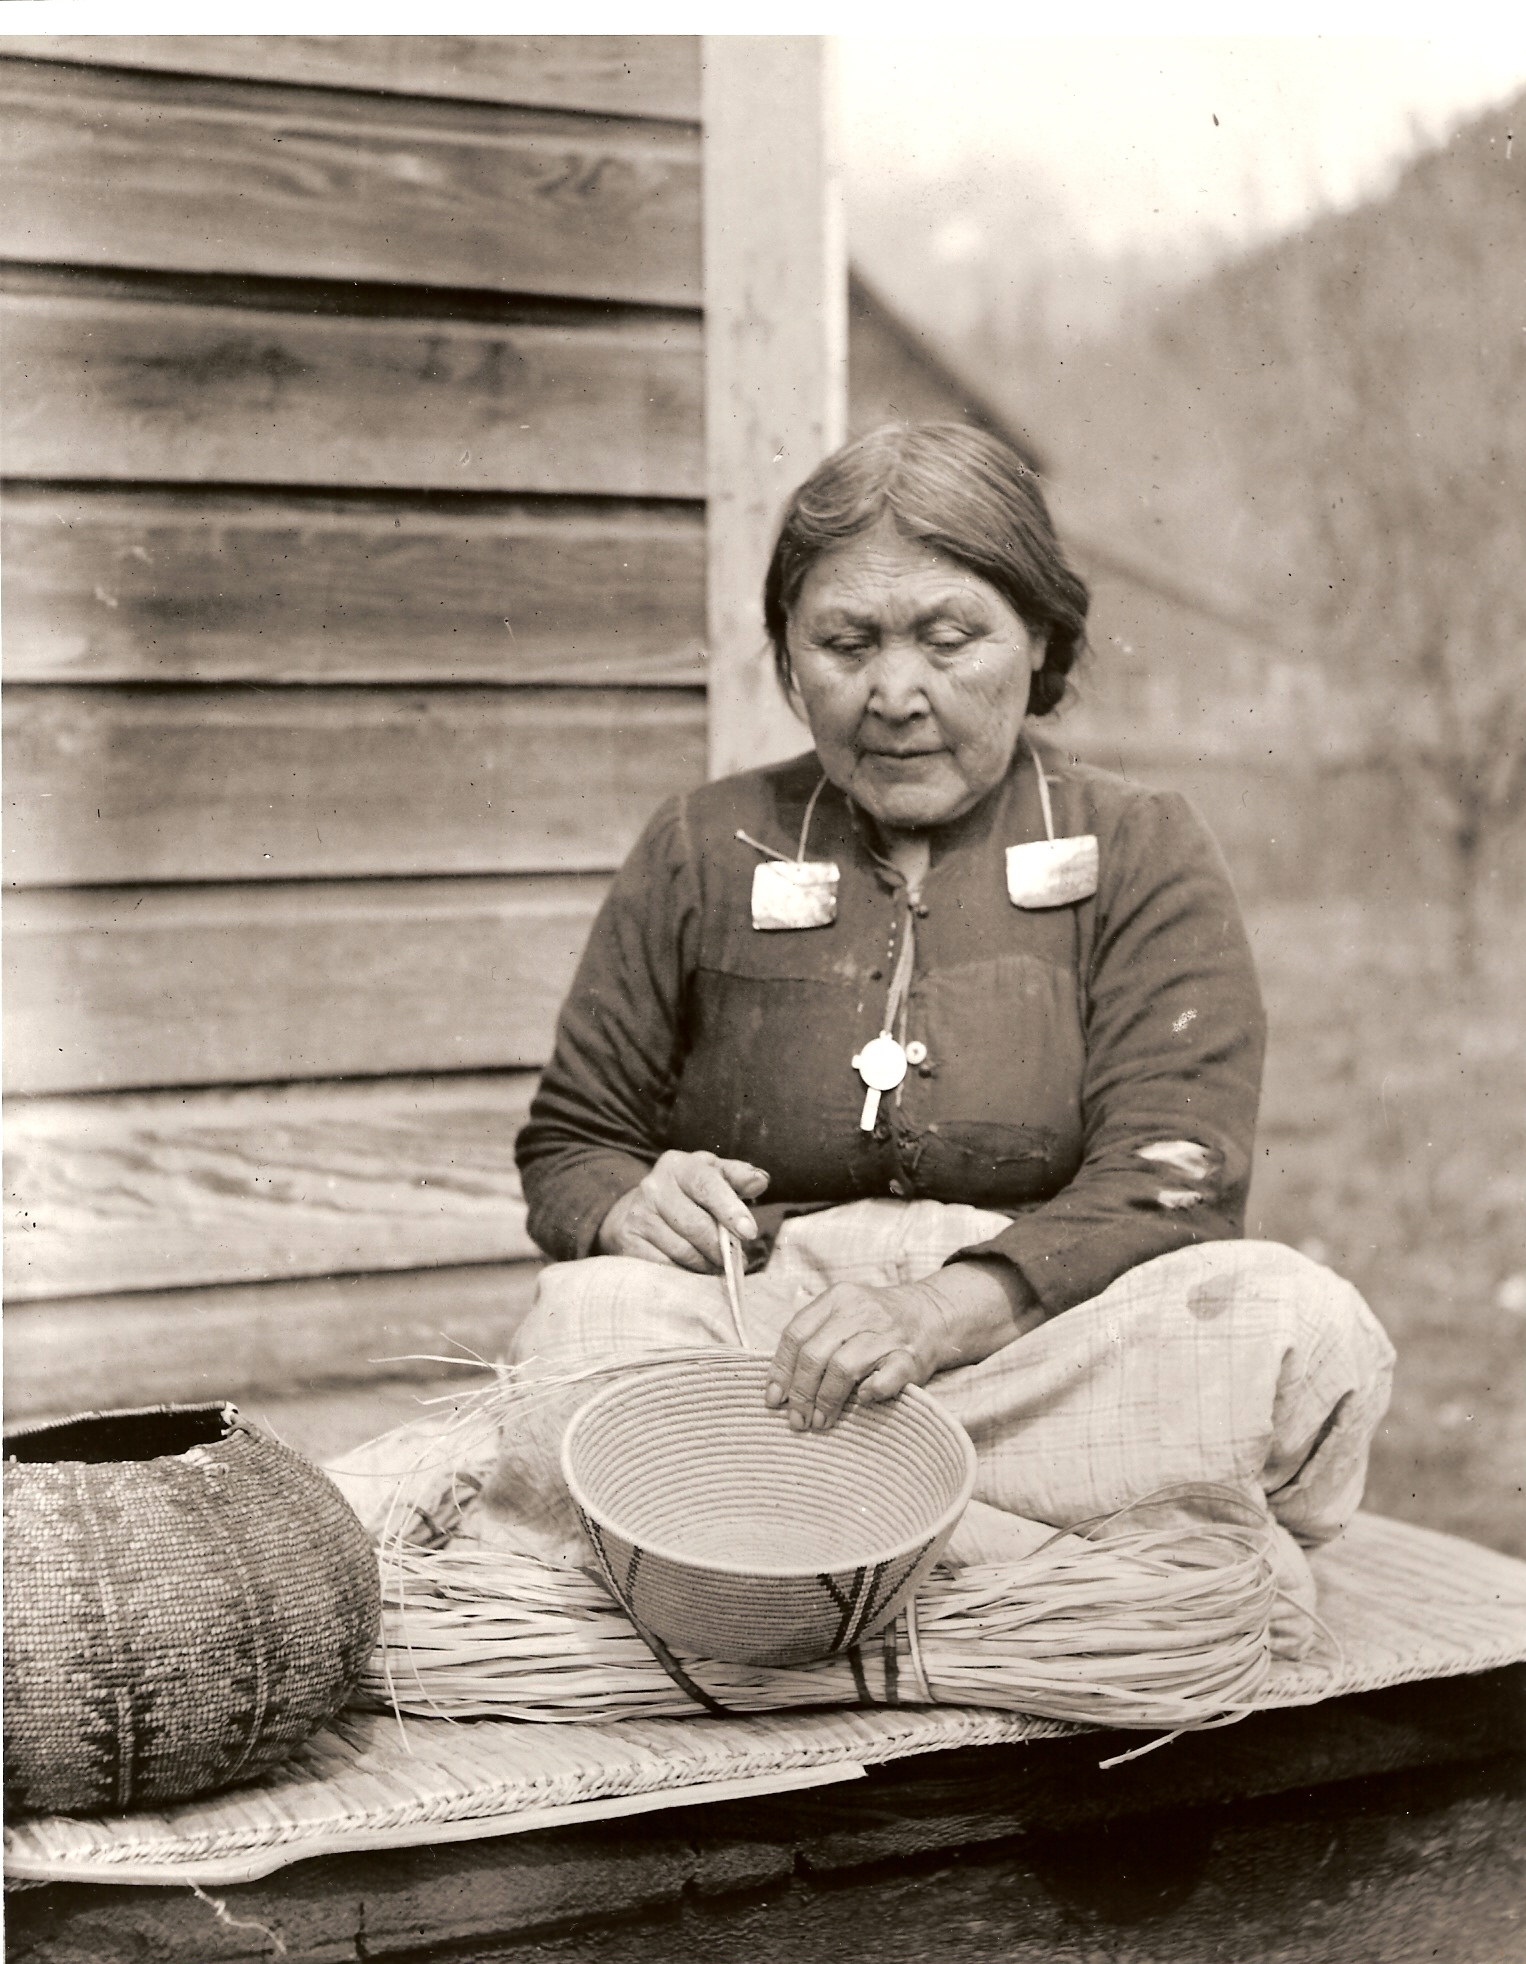 An older woman sitting on a porch weaves a basket.